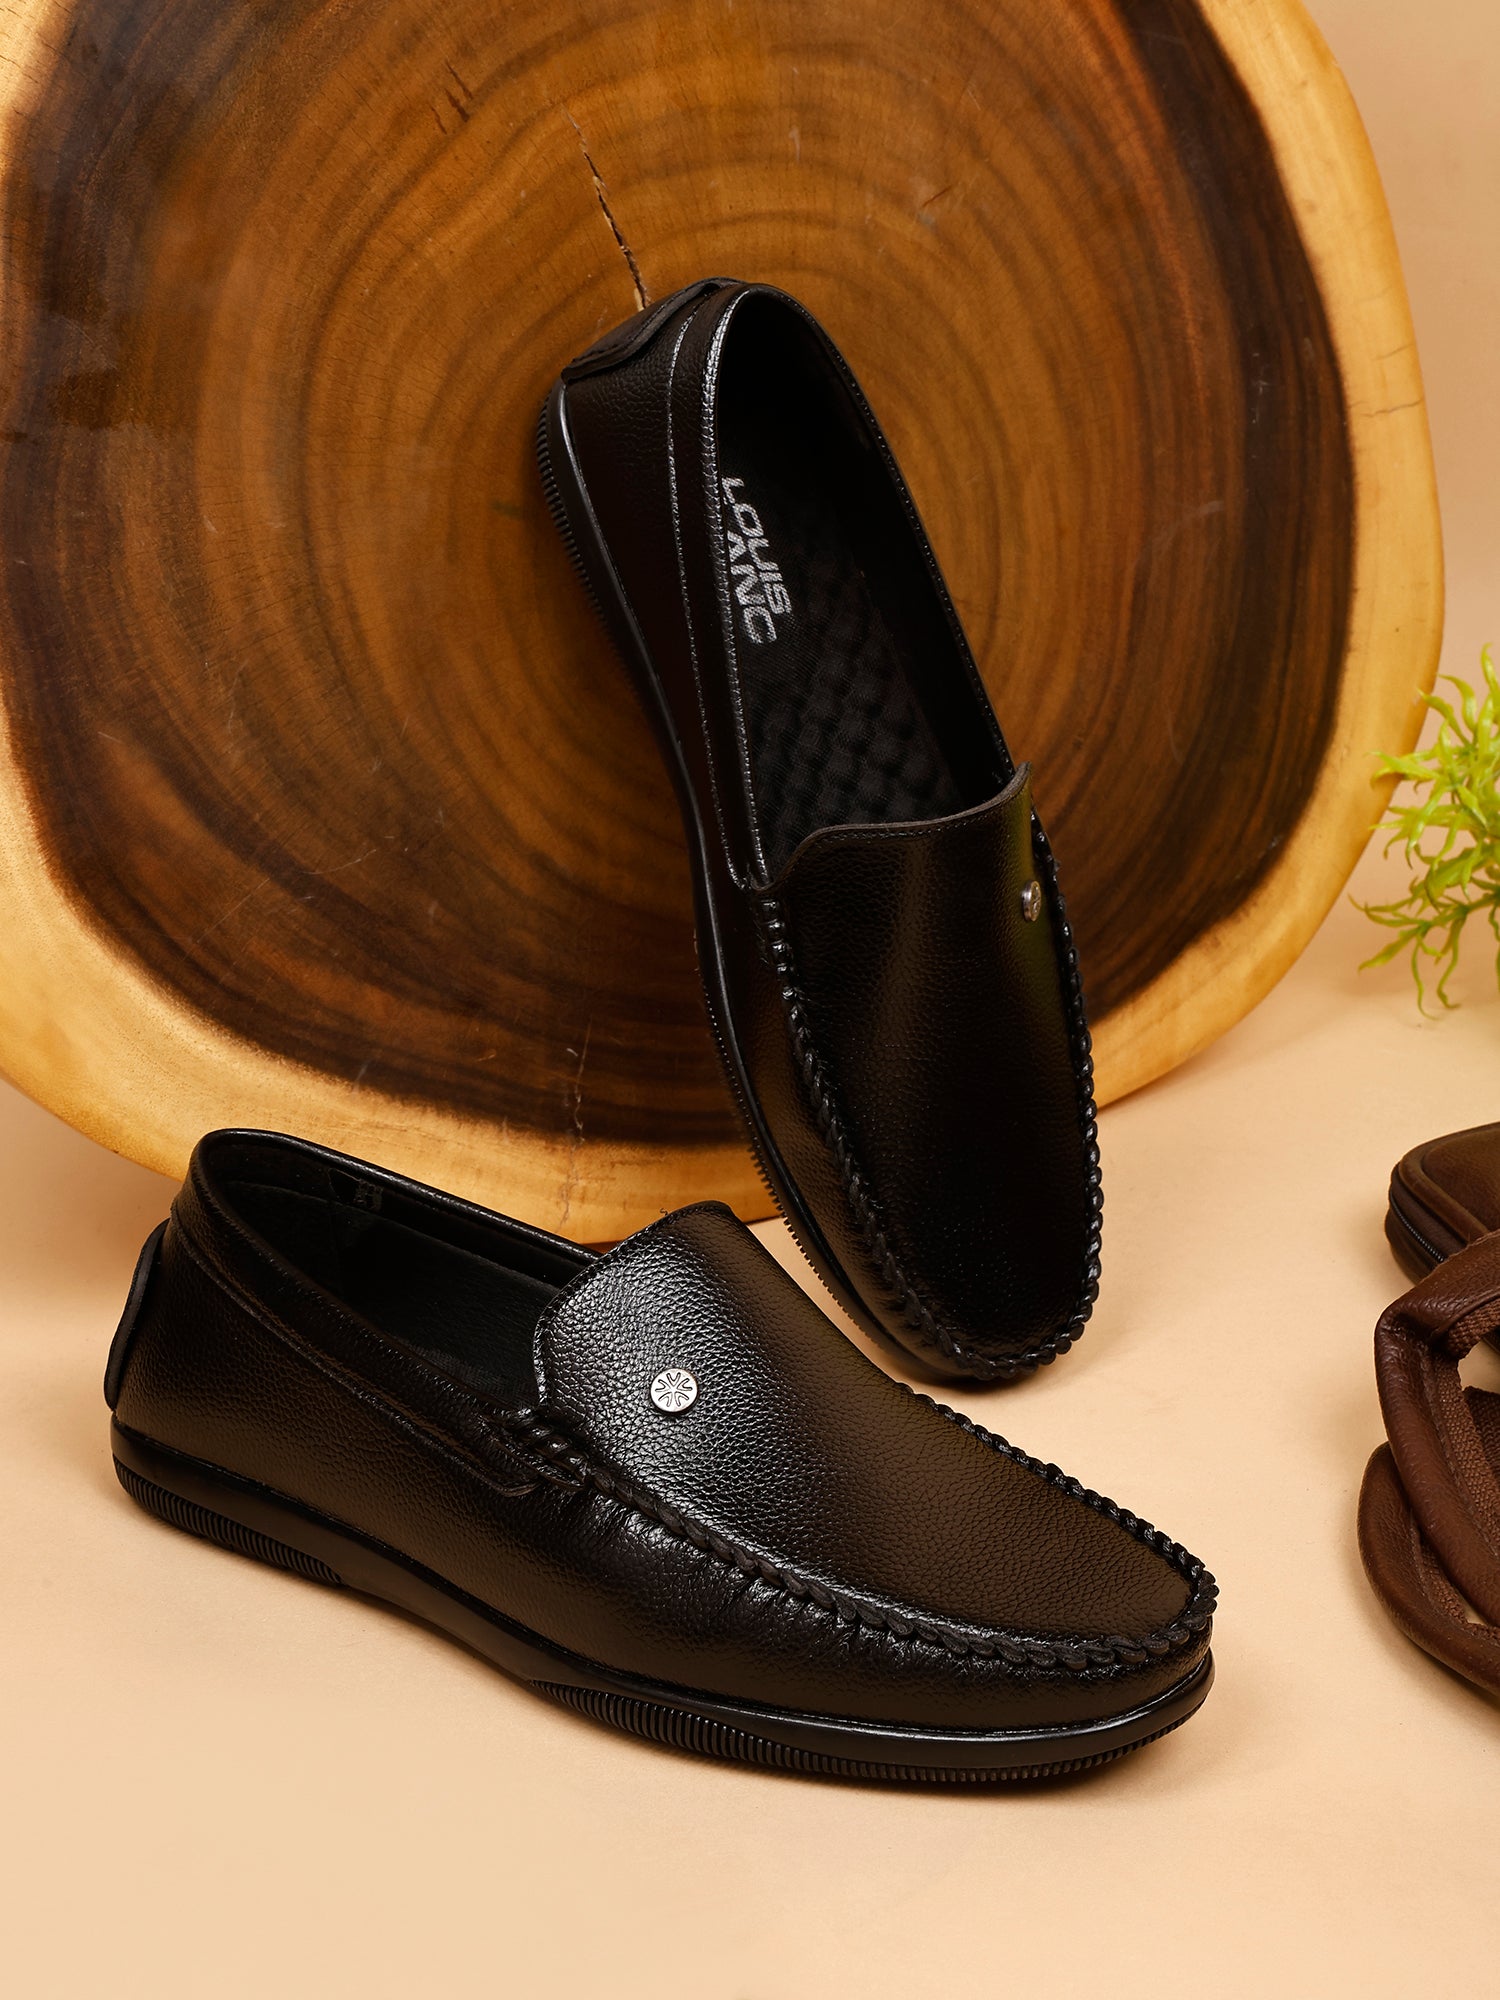 LB 45 Buckle Obsidian Black  Slip On Style Loafer Most Comfortable Doctor Insole With Wrinkle Free Fox Leather Loafers.